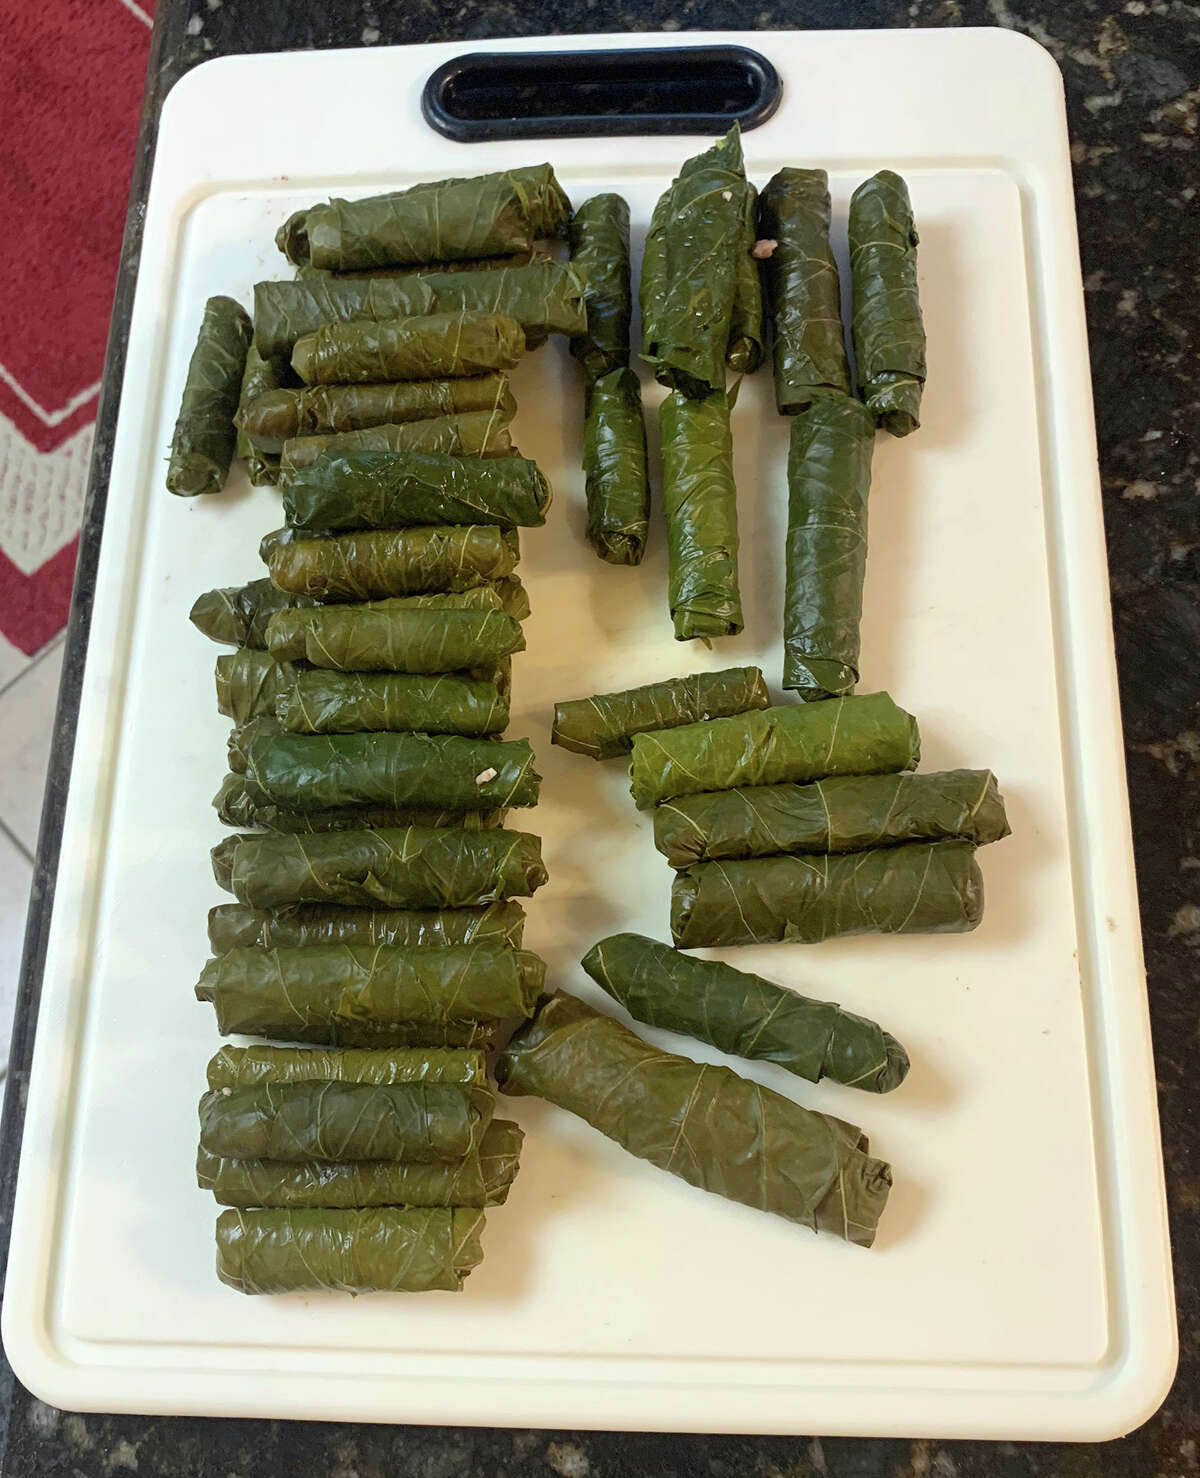 Freshly rolled dolmas ready to cook. Photo by Andy Coughlan